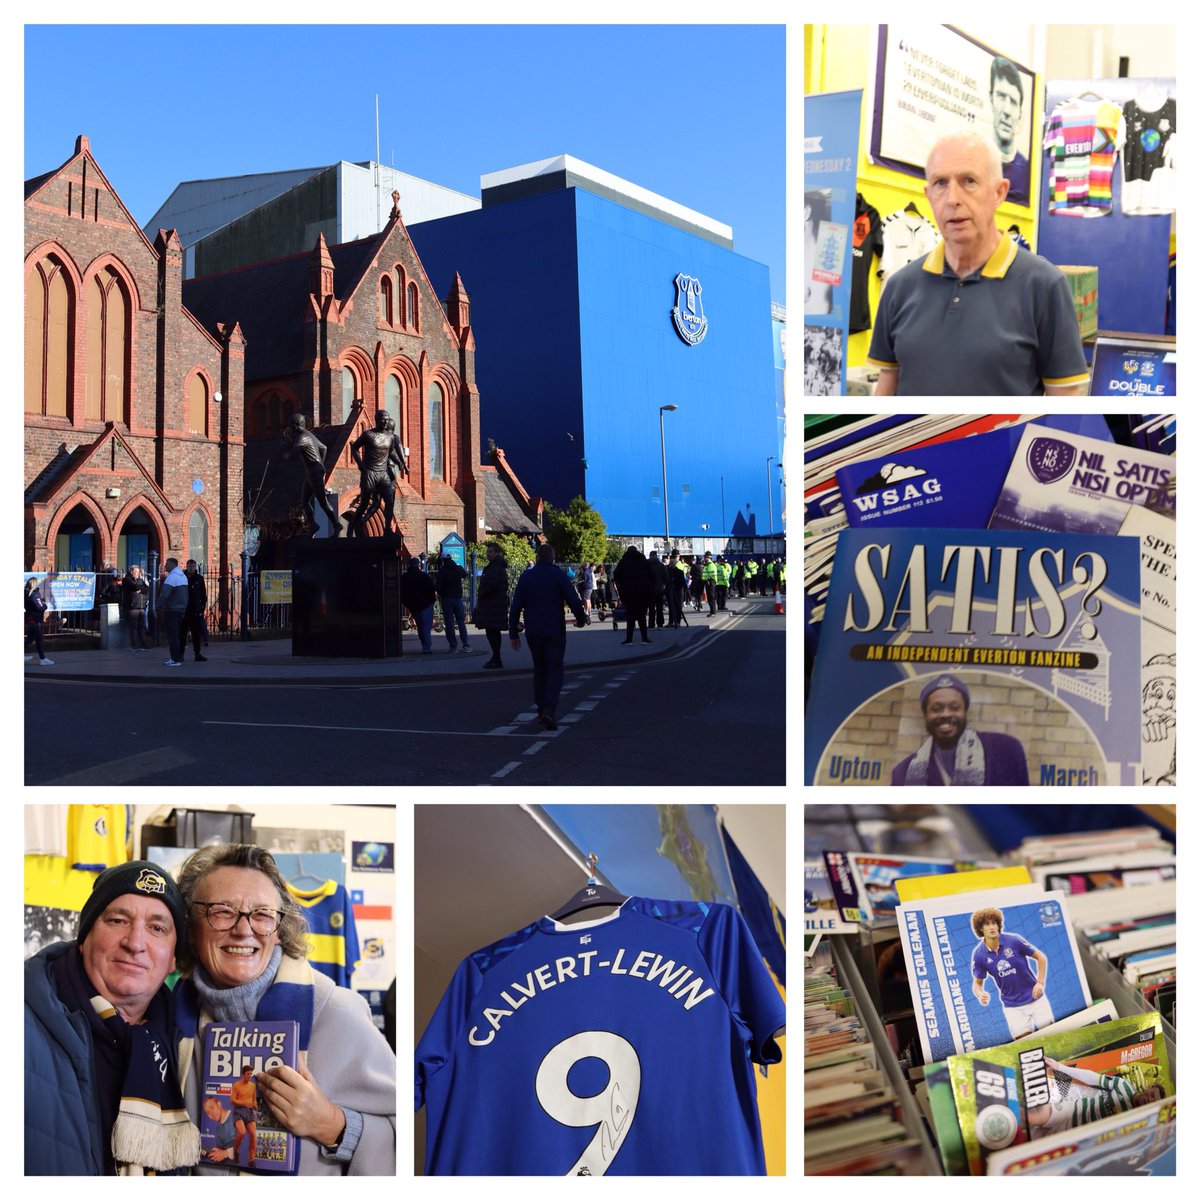 The unique matchday experience at St Luke’s with @EvertonHeritage & friends. @Everton & @BrentfordFC supporters: do pop in this afternoon up to 30 mins before K.O. @efc_fanservices @ToffeeArt @ToffeePages @BlueBren @theruleteros @EFC_FanAdvisory @RainbowToffees @WorldRetroShirt